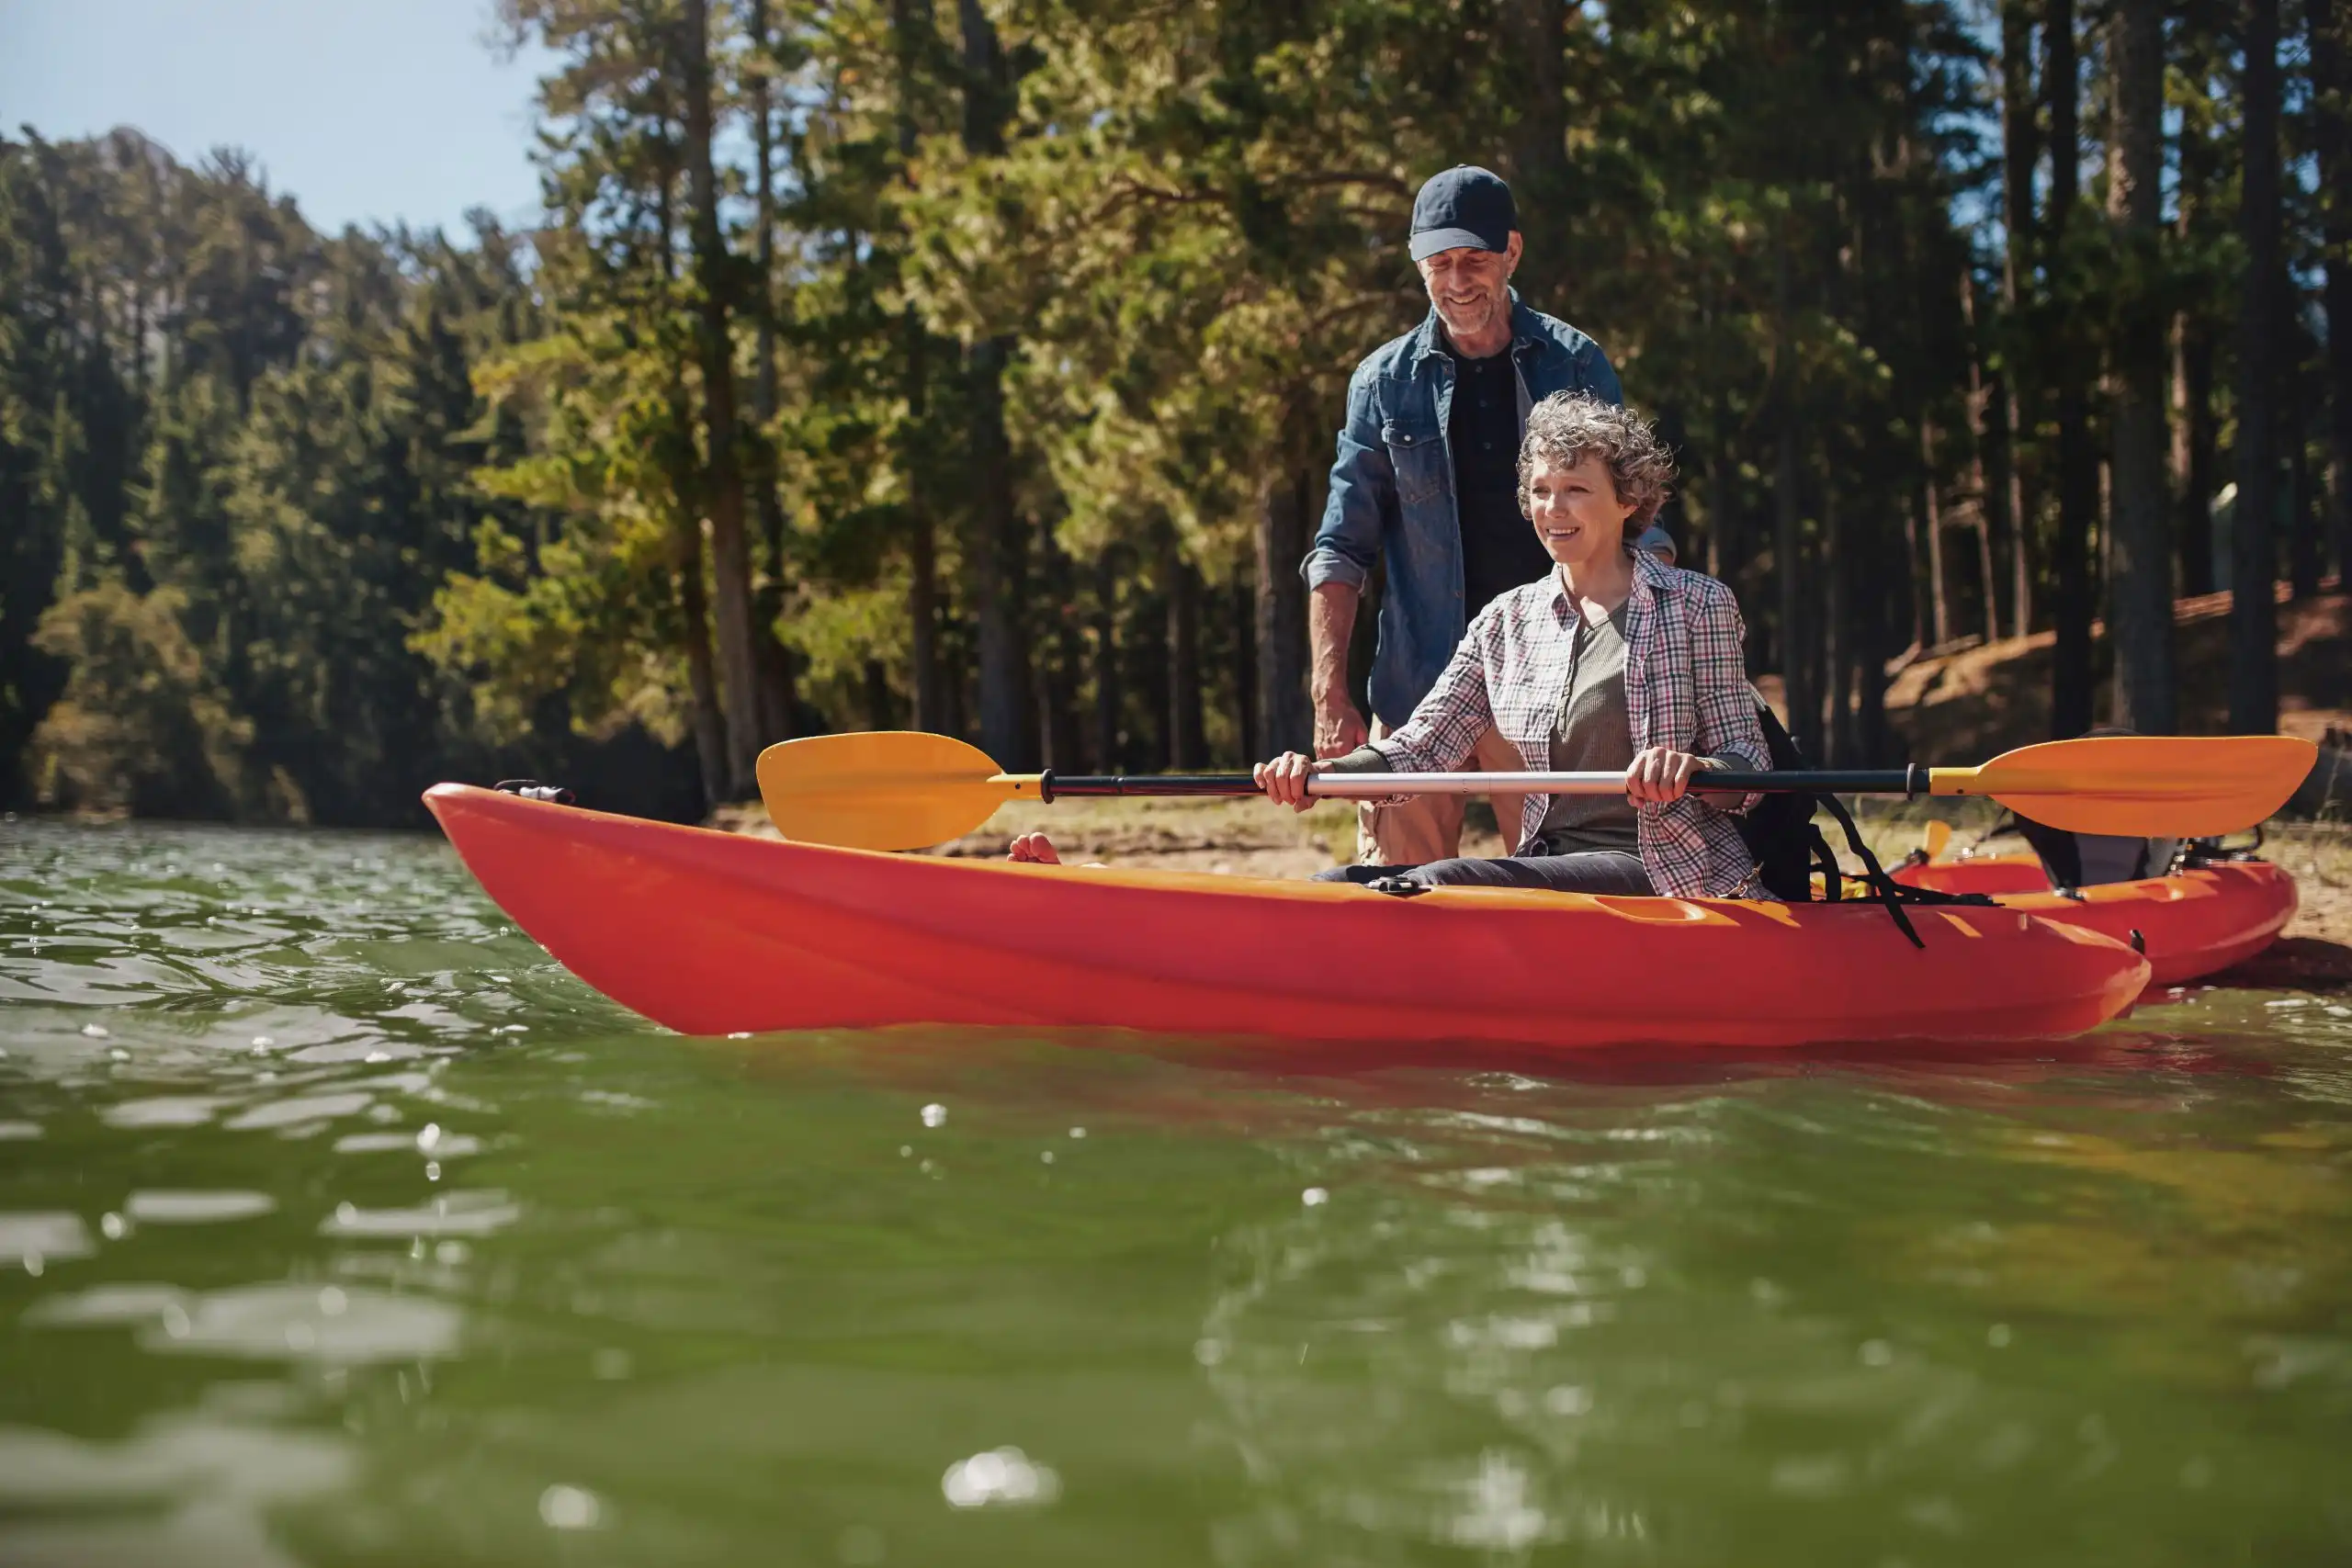 a senior woman getting kayaking lessong from a man-Best way to kayak with bad stiff knees